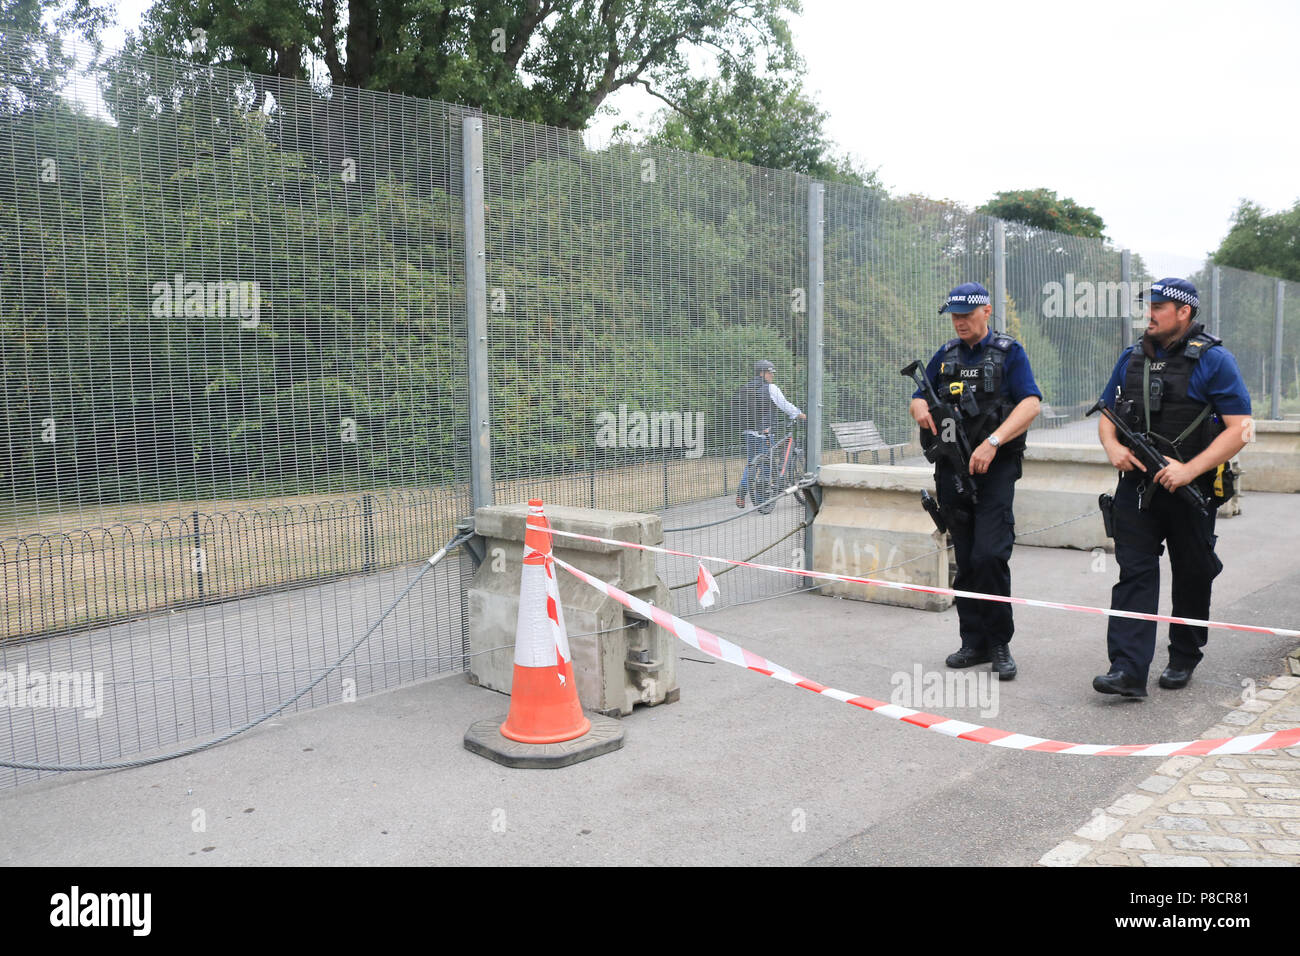 London UK. 11th July 2018. Security metal barriers and fences are installed around the US Ambassador's residence at  Winfield House in Regents Park to create a ring of steel where President Donald Trump will be guest during his first official visit to the United Kingdom on 13 July.  US President Donald Trump will meet British Prime Minister Theresa May and Queen Elizabeth II after a postponed trip to Britain starting  during which he will also discuss the prospects for a UK-US free trade deal after Brexit. Credit: amer ghazzal/Alamy Live News Stock Photo